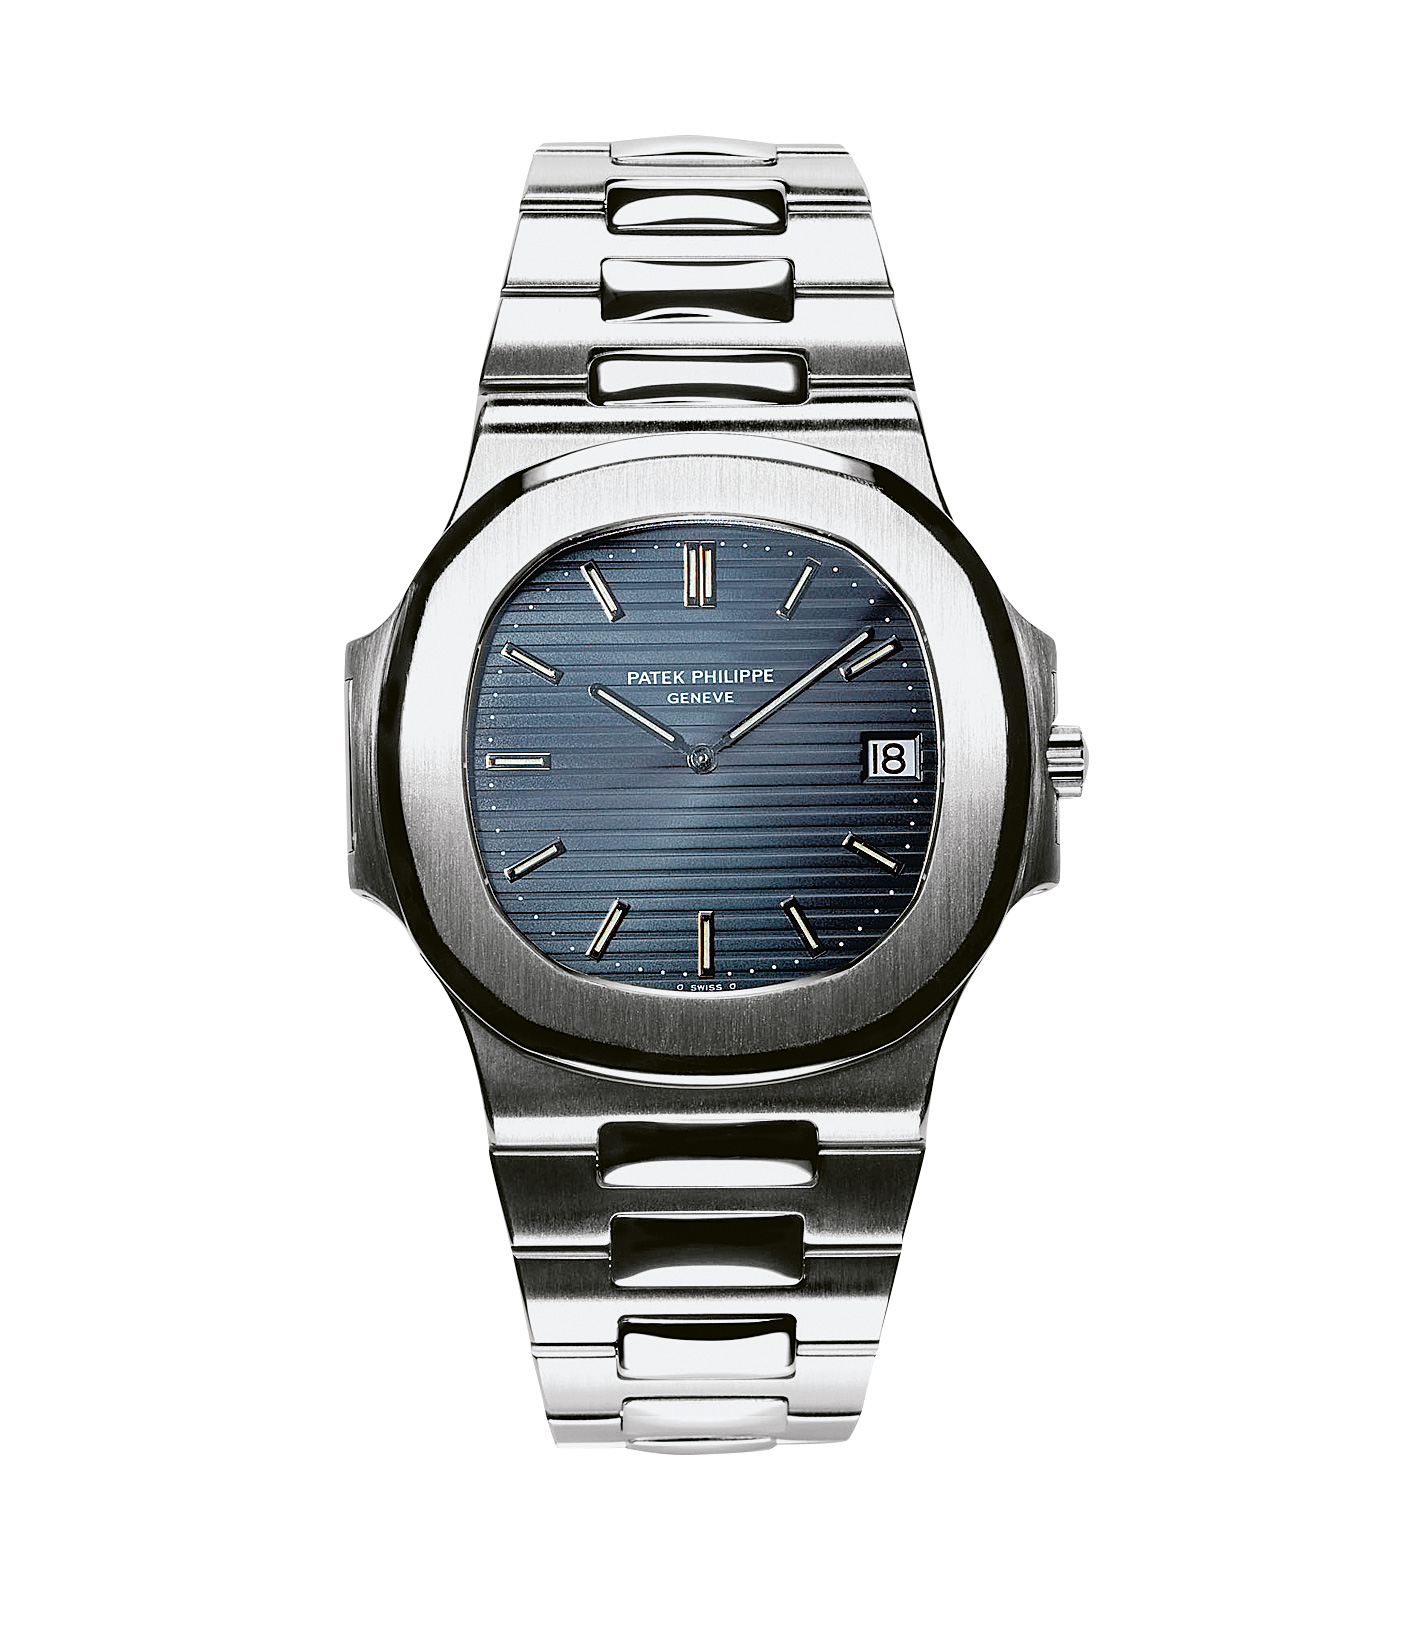 Patek Philippe Nautilus Review & Why It's The Best Luxury Sports Watch